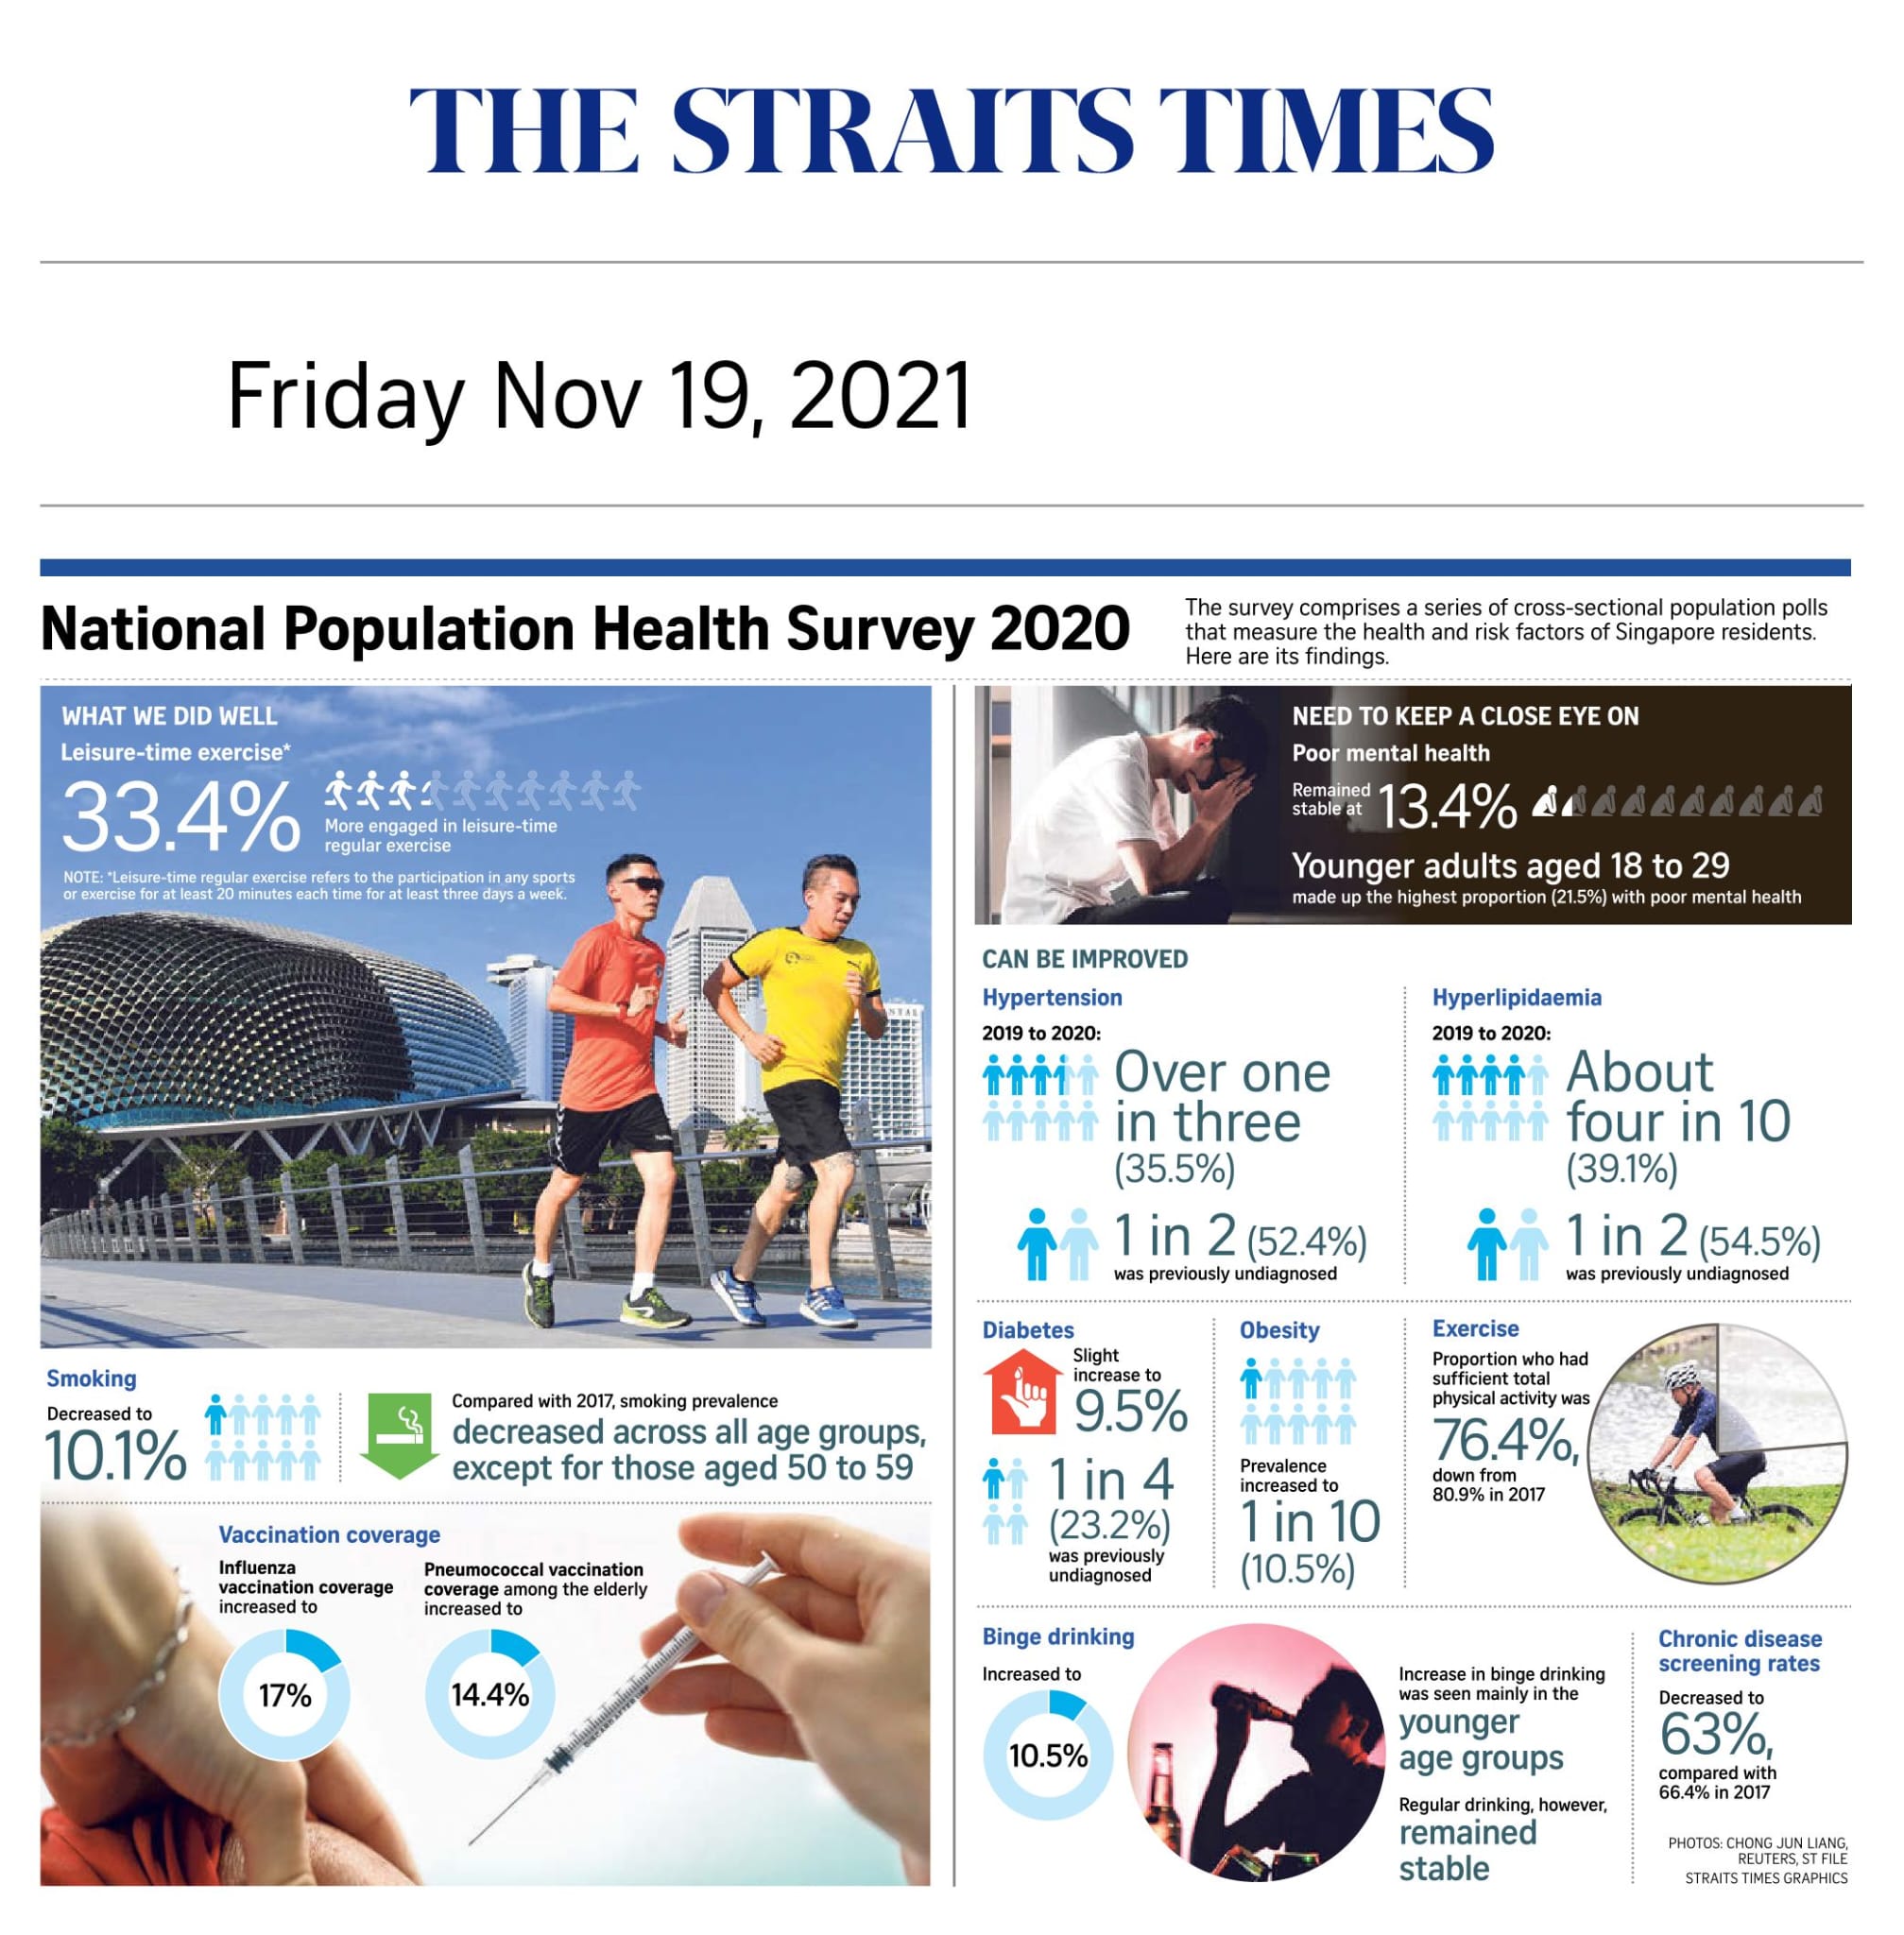 National Population Health Survey 2020 - Published in The Straits Times Nov 19, 2021